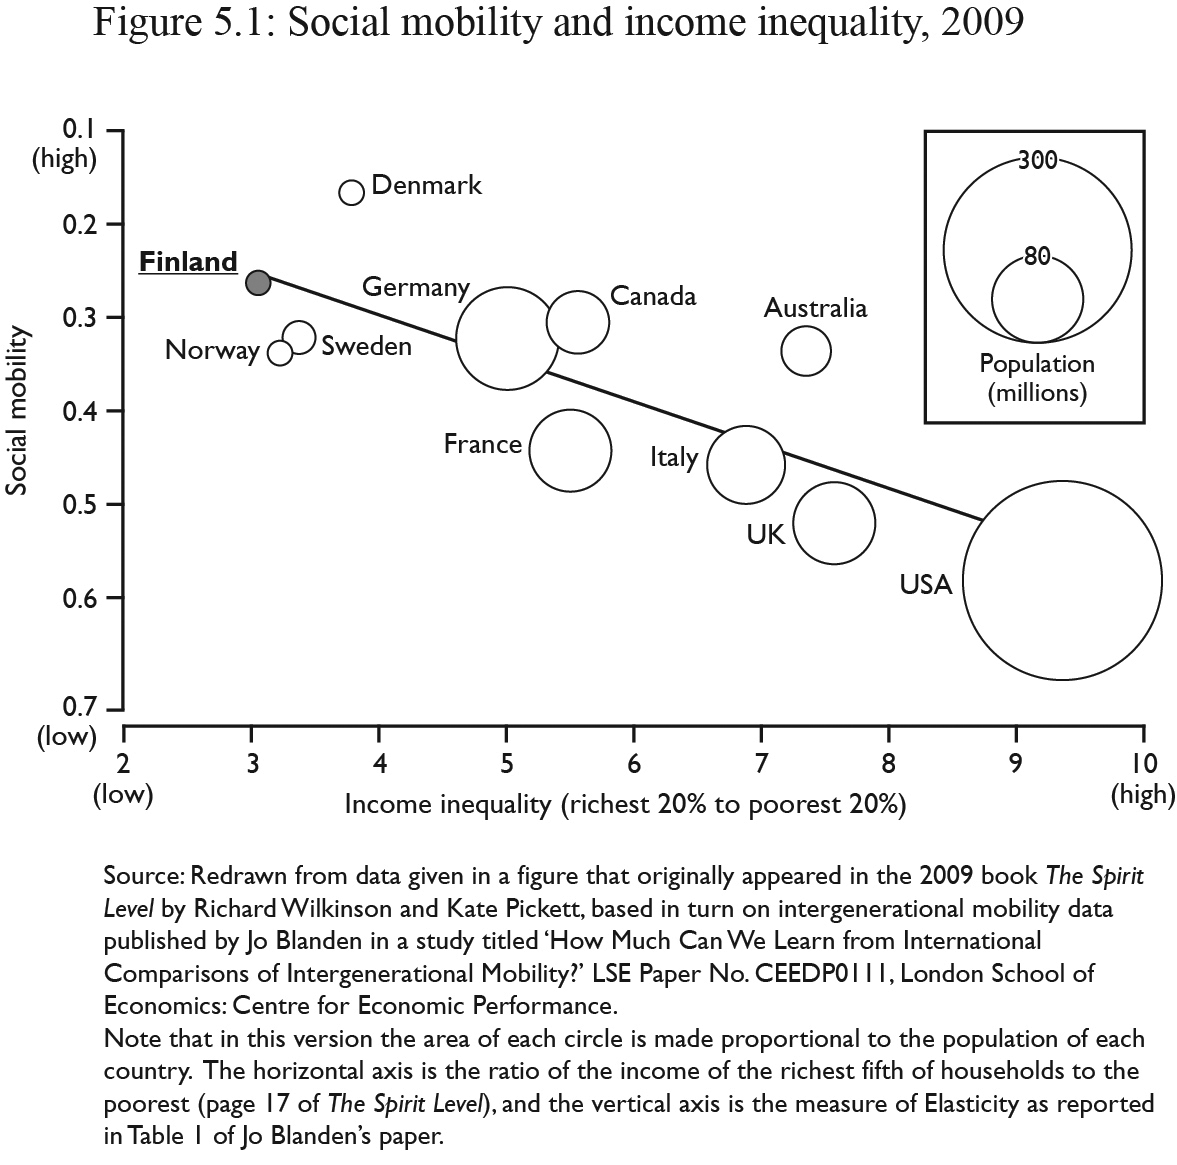 Figure 5.1: Source: Redrawn from data given in a figure that originally appeared in the 2009 book The Spirit Level by Richard Wilkinson and Kate Pickett, based in turn on intergenerational mobility data published by Jo Blanden in a study titled ‘How Much Can We Learn from International Comparisons of Intergenerational Mobility?’ LSE Paper No. CEEDP0111, London School of Economics: Centre for Economic Performance. Note that in this version the area of each circle is made proportional to the population of each country. The horizontal axis is the ratio of the income of the richest fifth of households to the poorest (page 17 of The Spirit Level), and the vertical axis is the measure of Elasticity as reported in Table 1 of Jo Blandon’s paper.